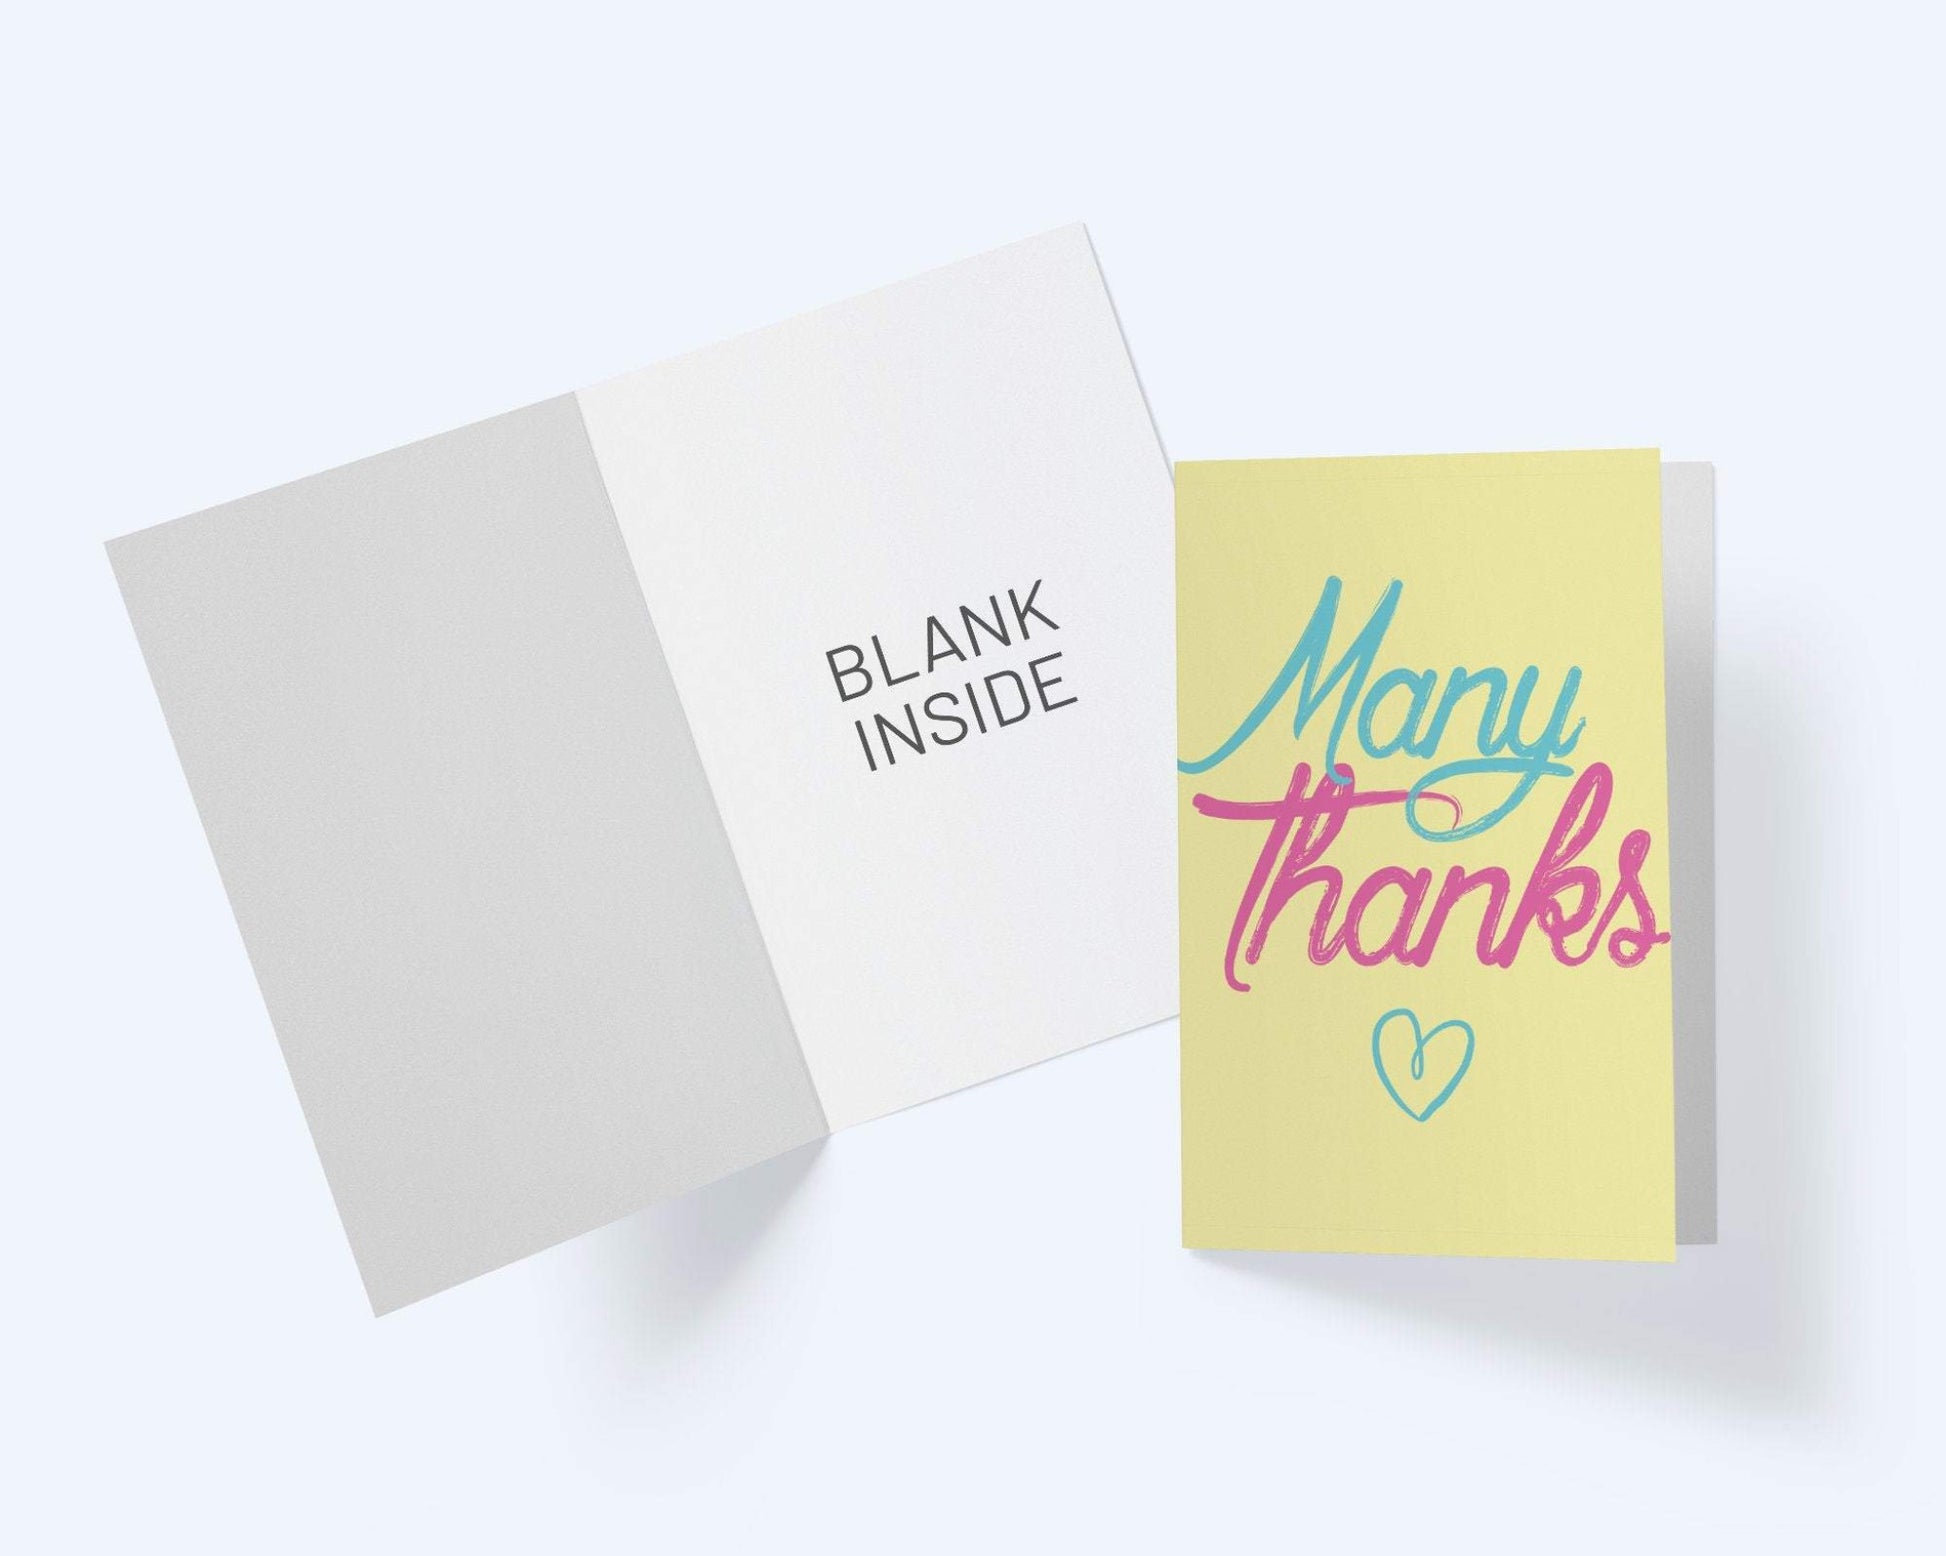 Many Thanks - Thank You Greeting Card.